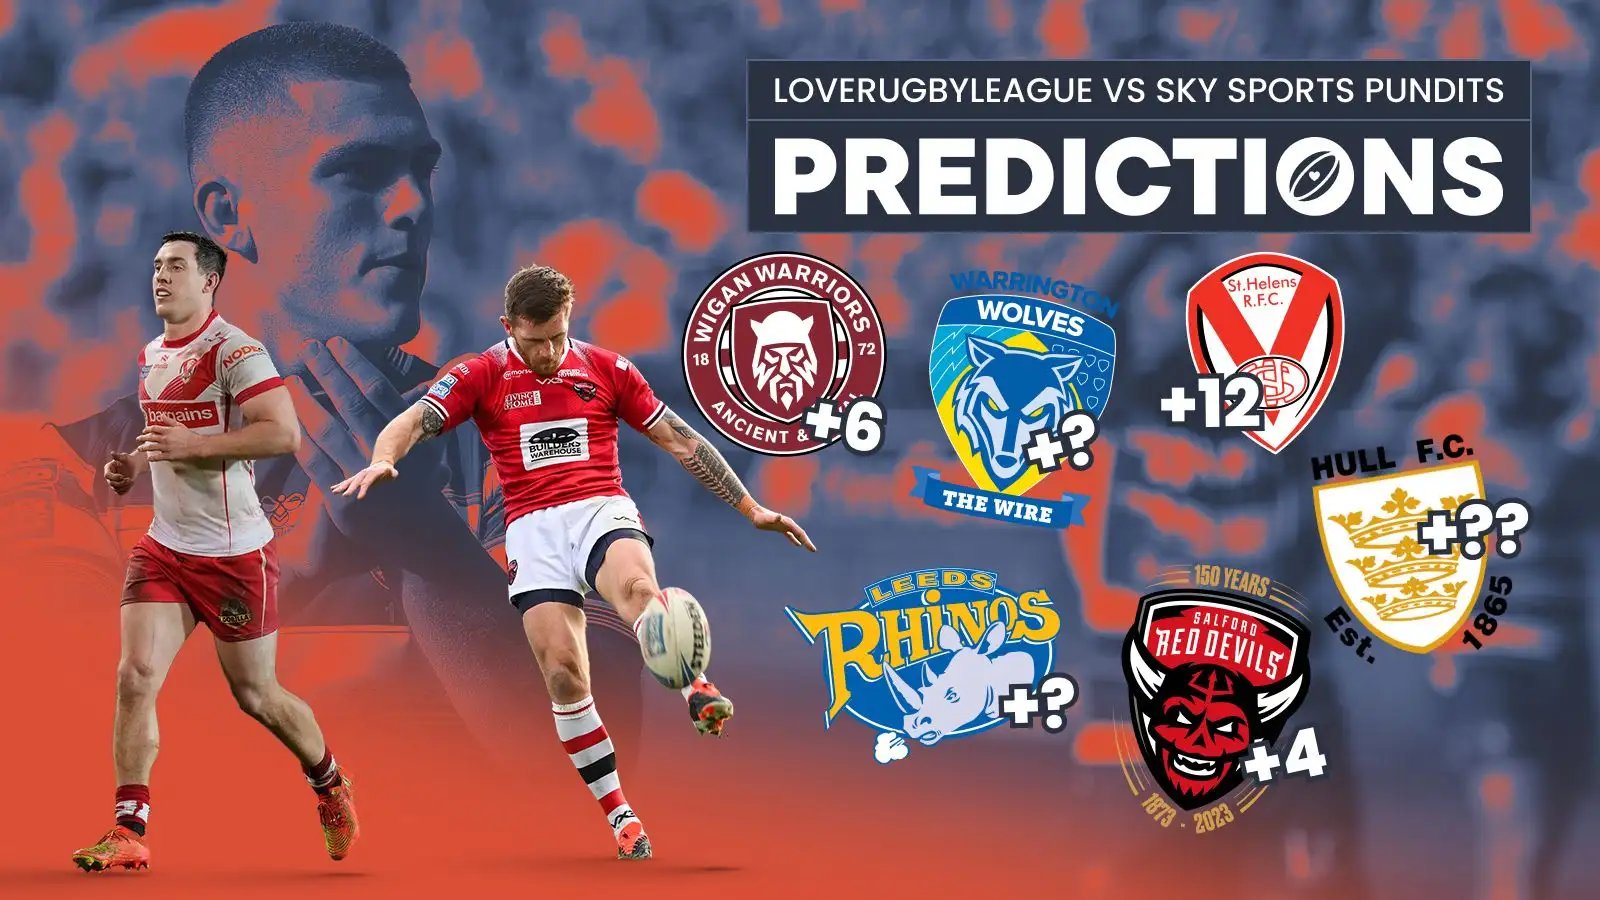 Super League Round 3 predictions: Love Rugby League versus Sky Sports commentator Dave Woods